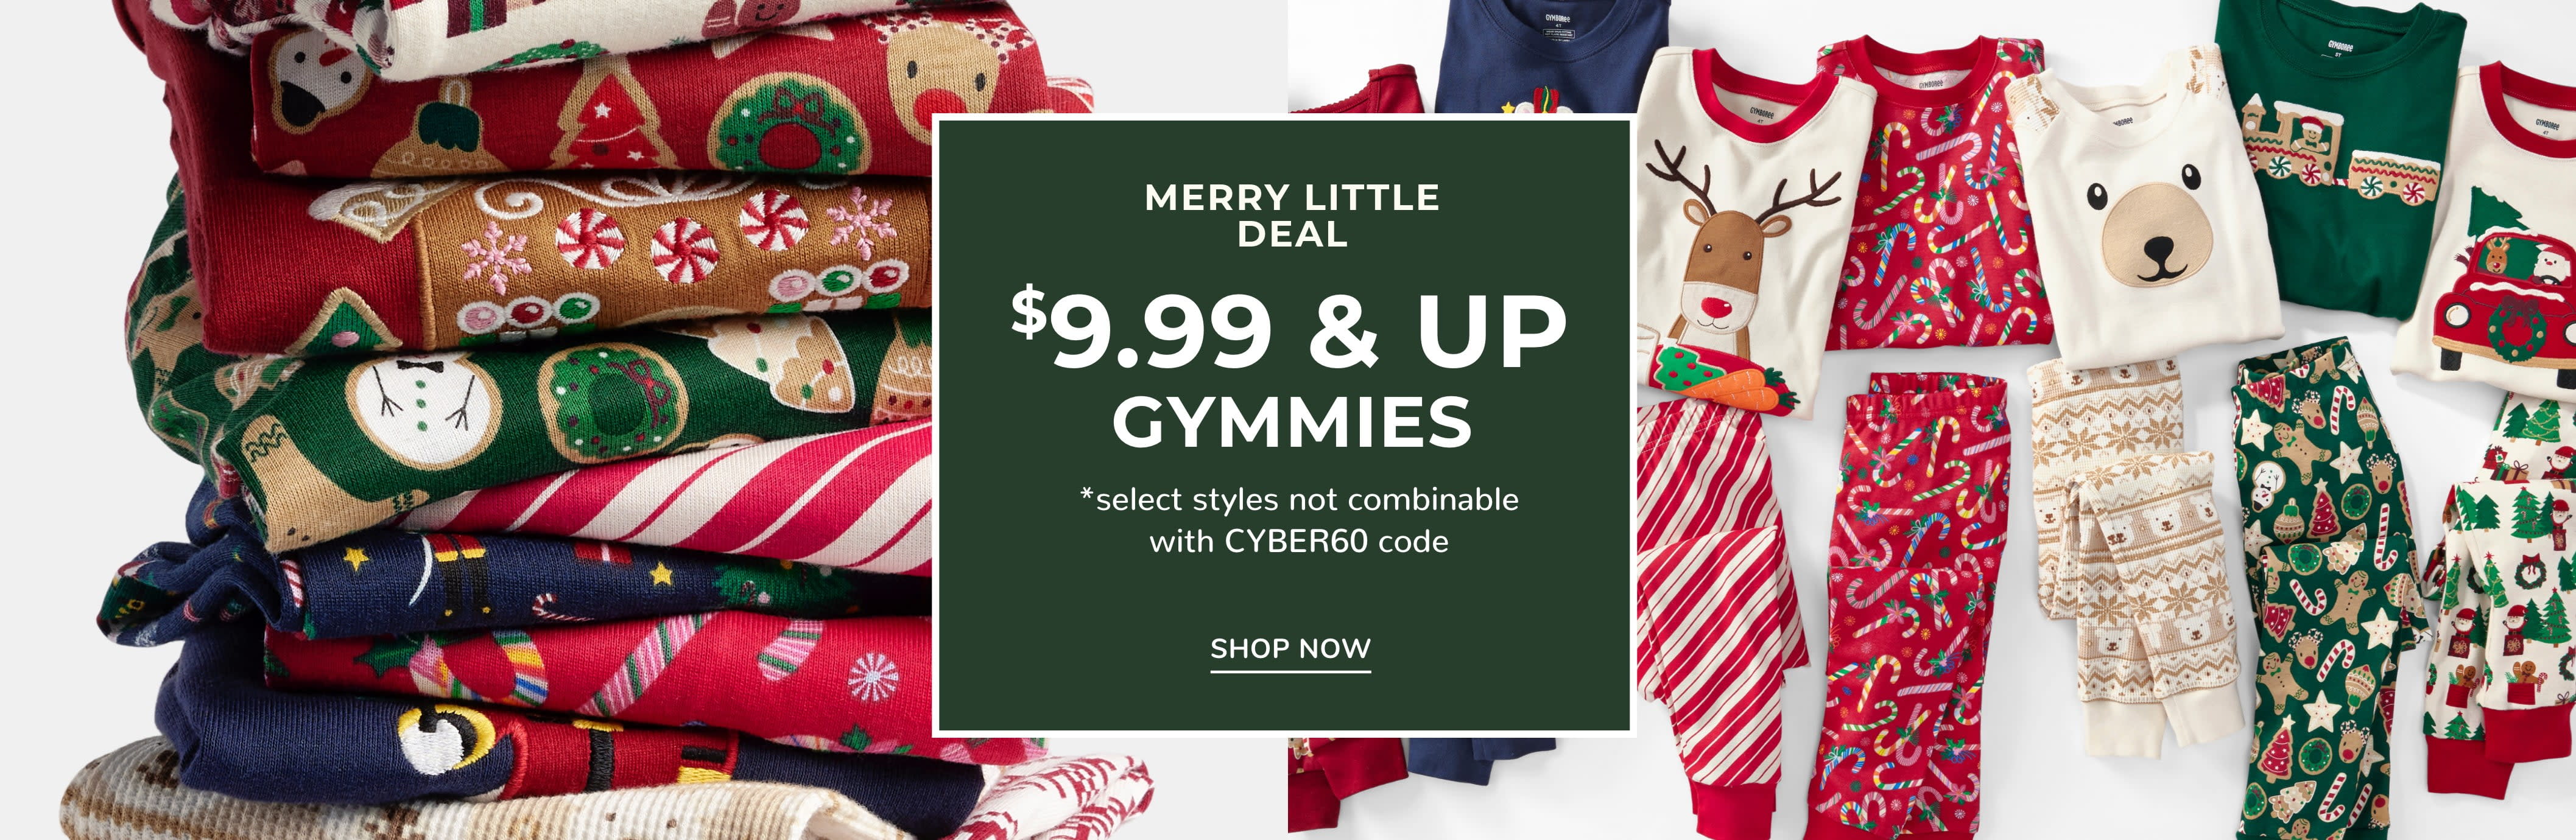 MERRY LITTLE DEAL | $9.99 & UP GYMMIES *select styles not combinable with CYBER60 code